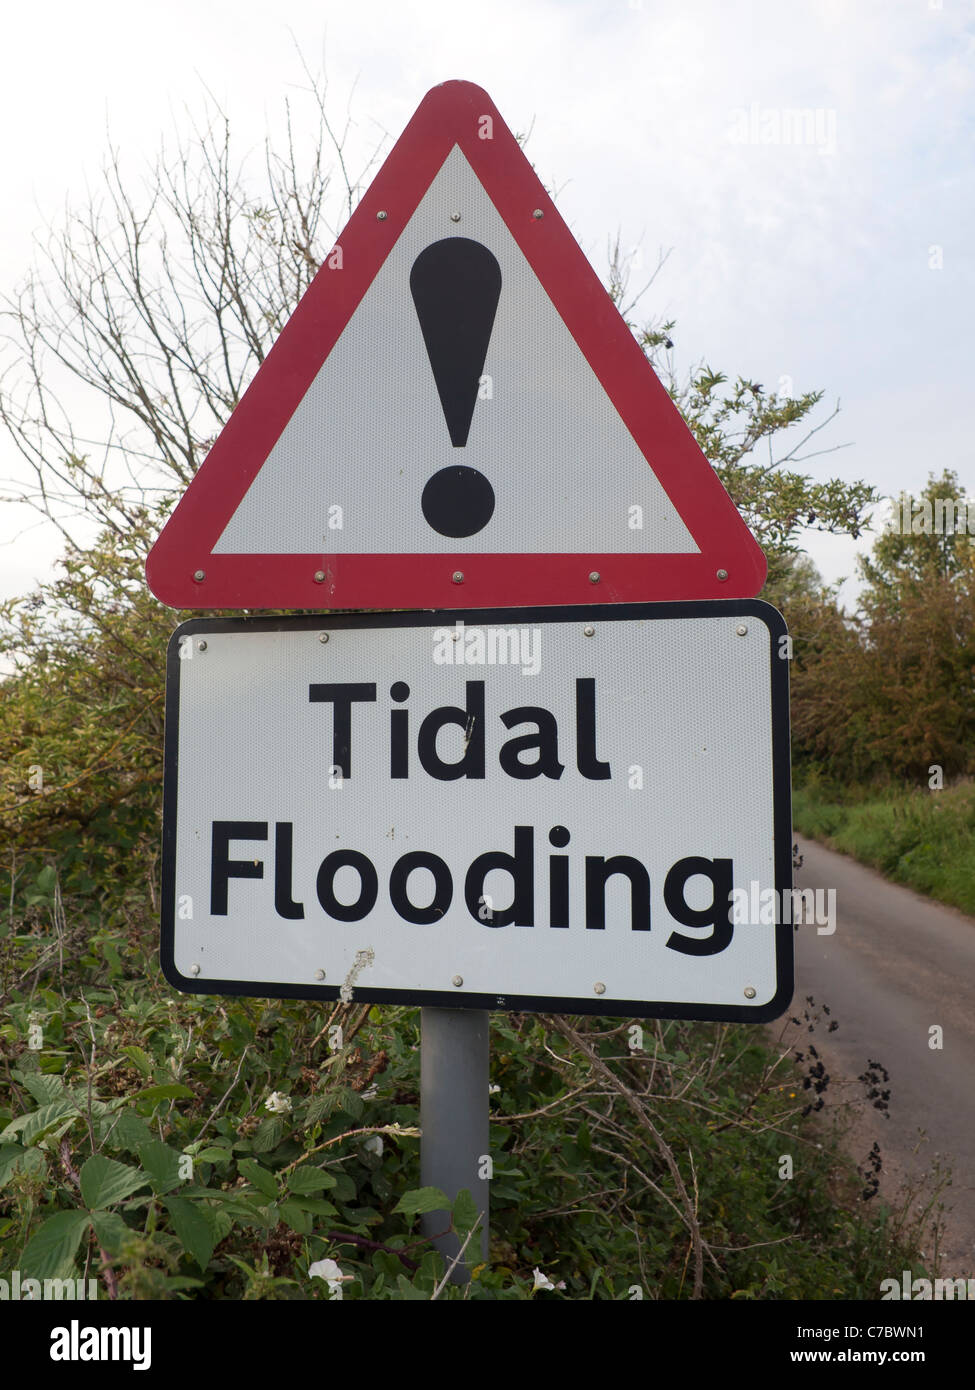 Sign showing road liable to tidal flooding Stock Photo